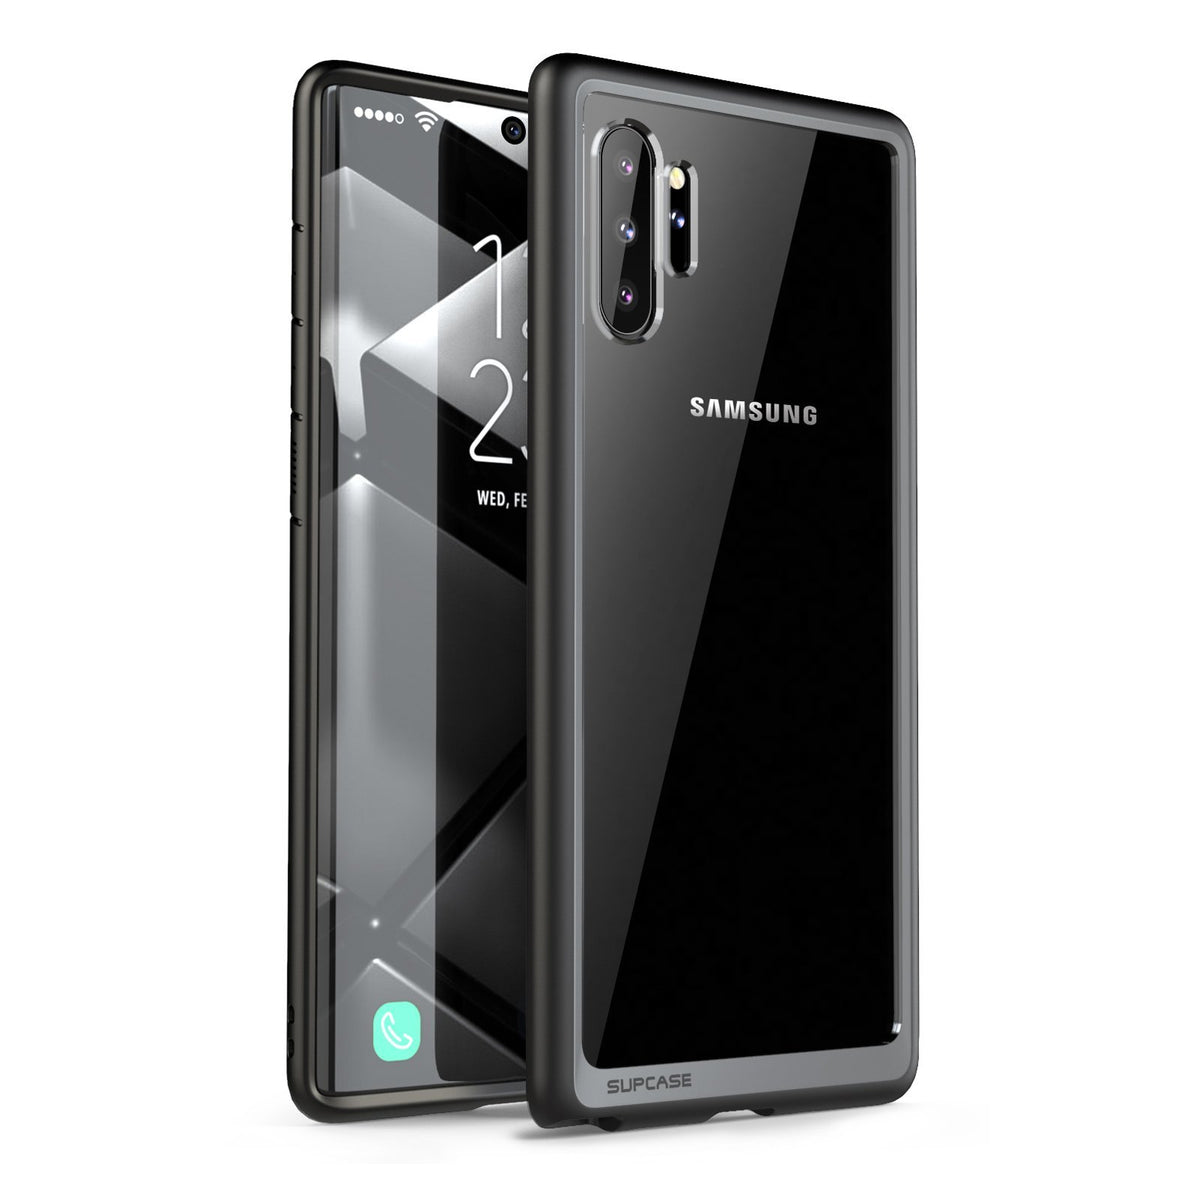 SUPCASE Galaxy Note 10 / Note 10 Plus Unicorn Beetle Style Clear Case - Black